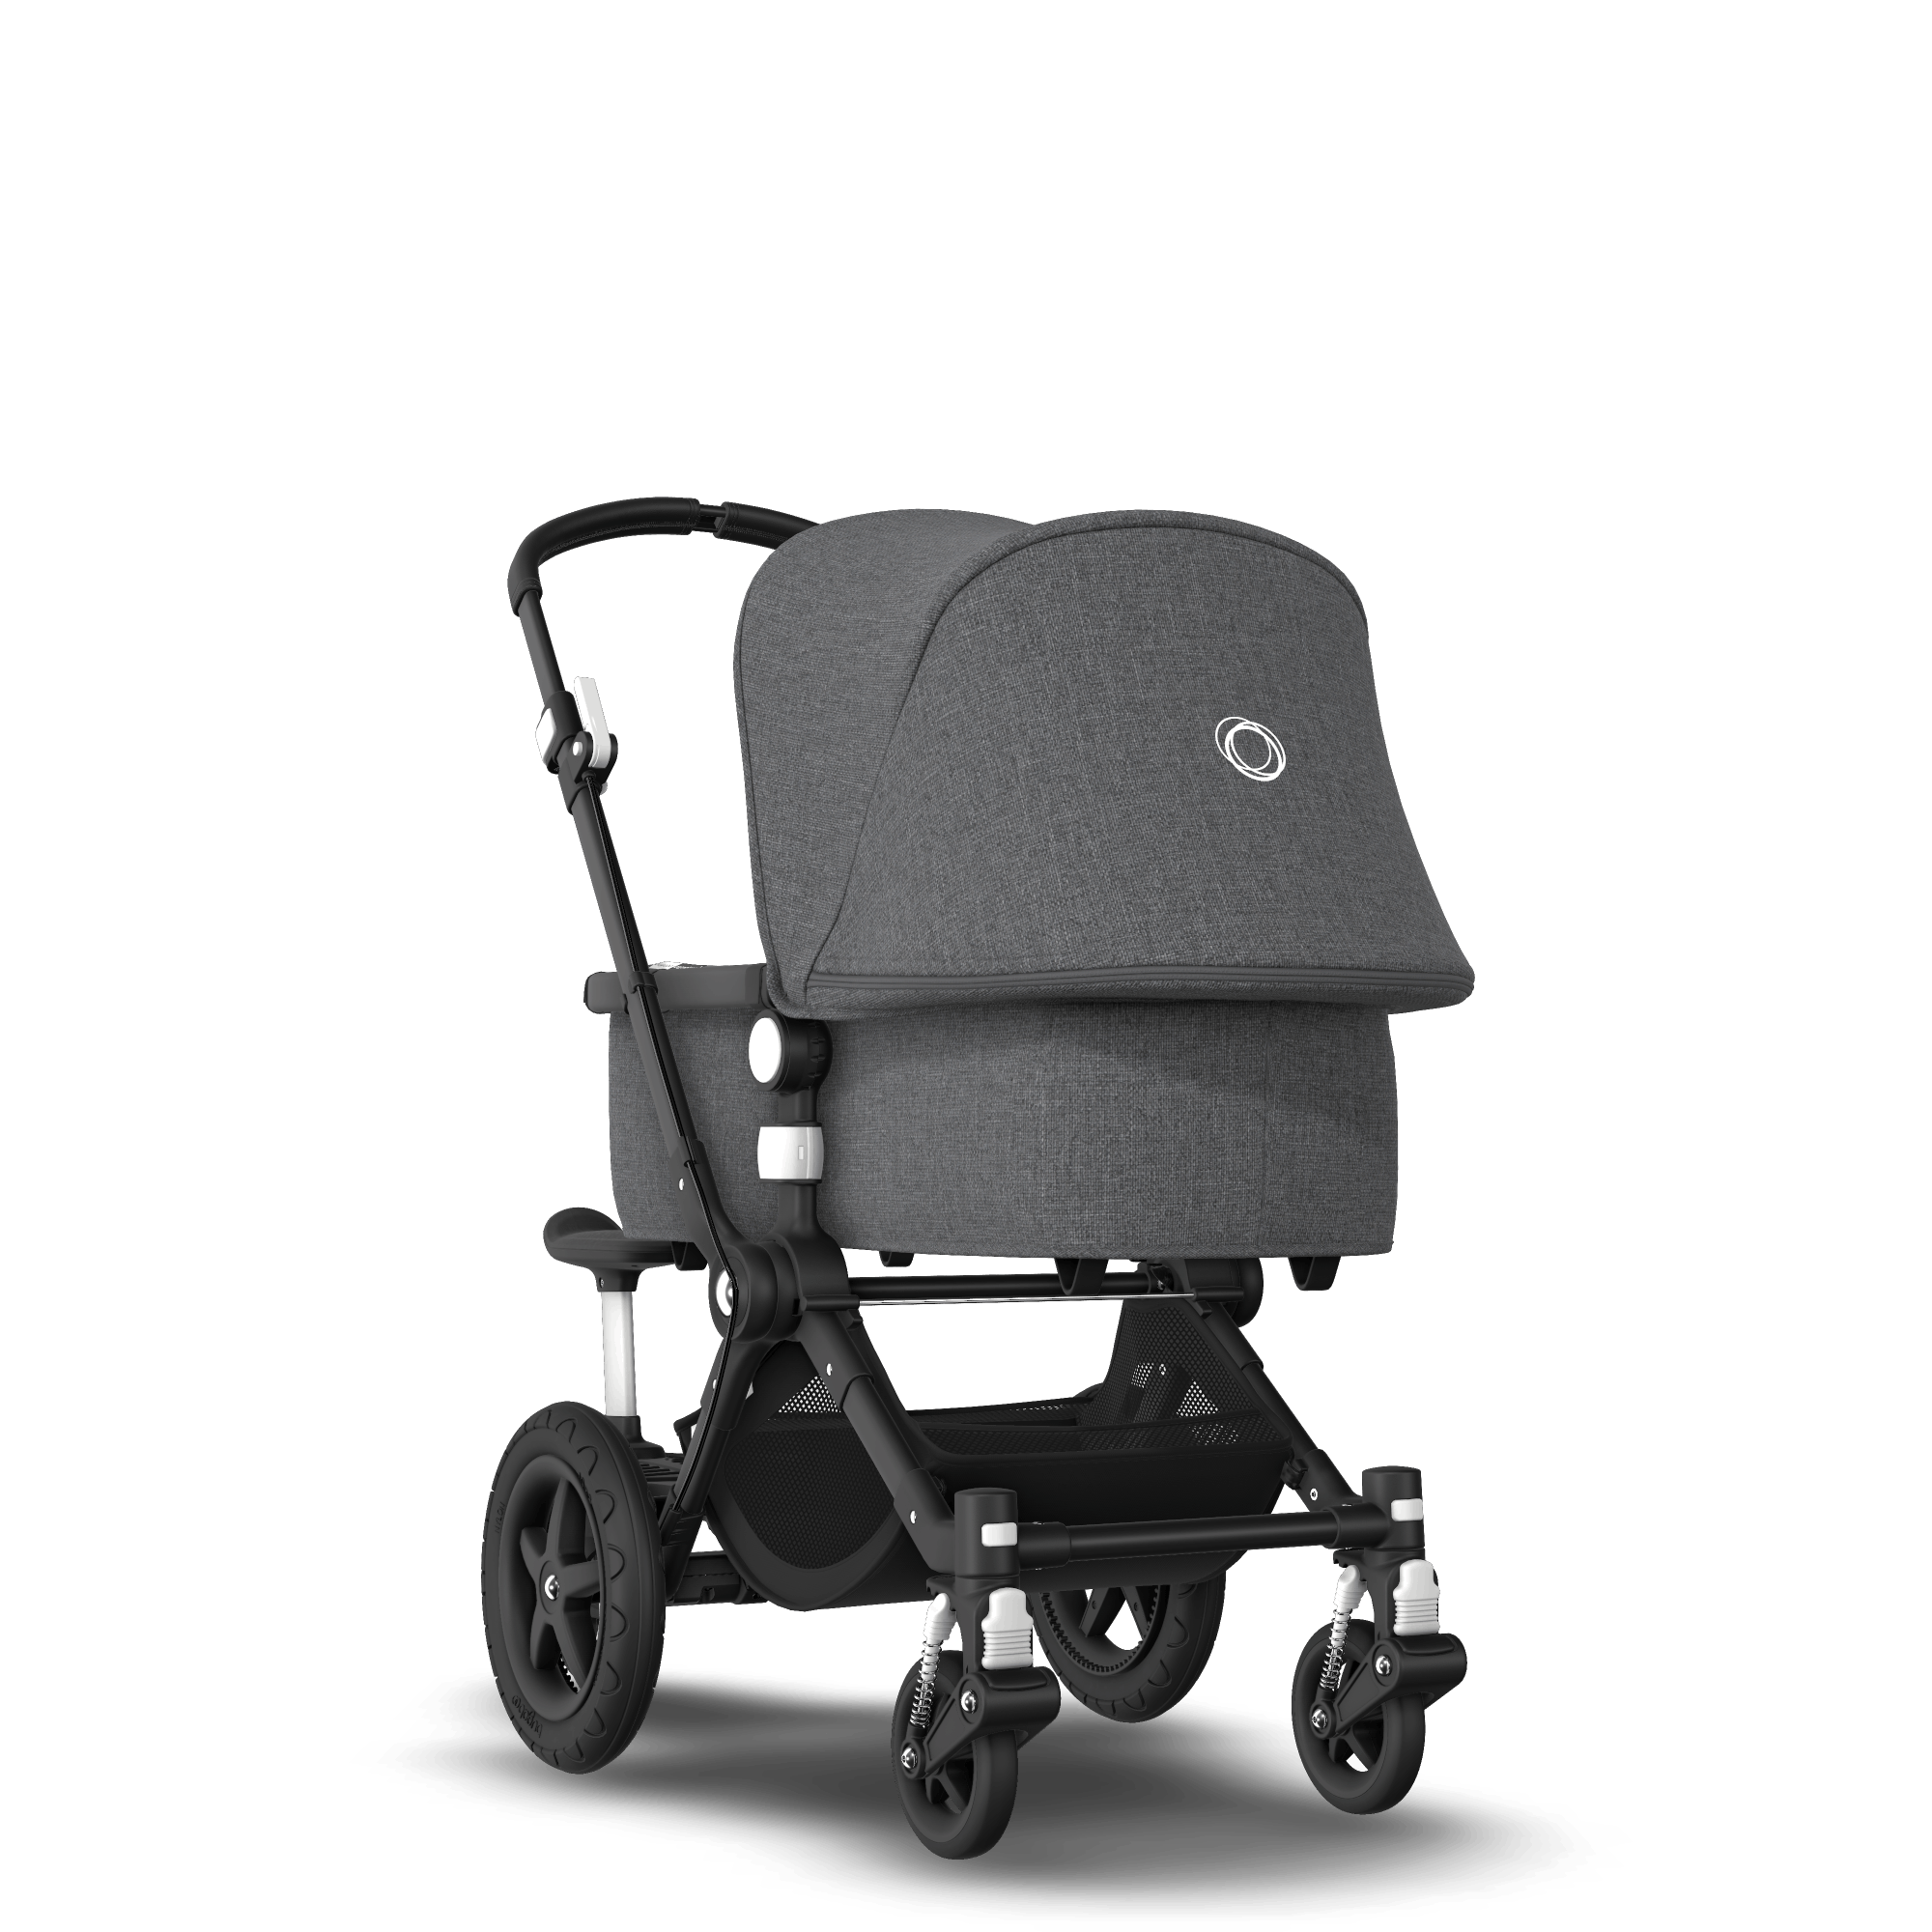 Bugaboo Cameleon 3 Plus Sit and stand pushchair